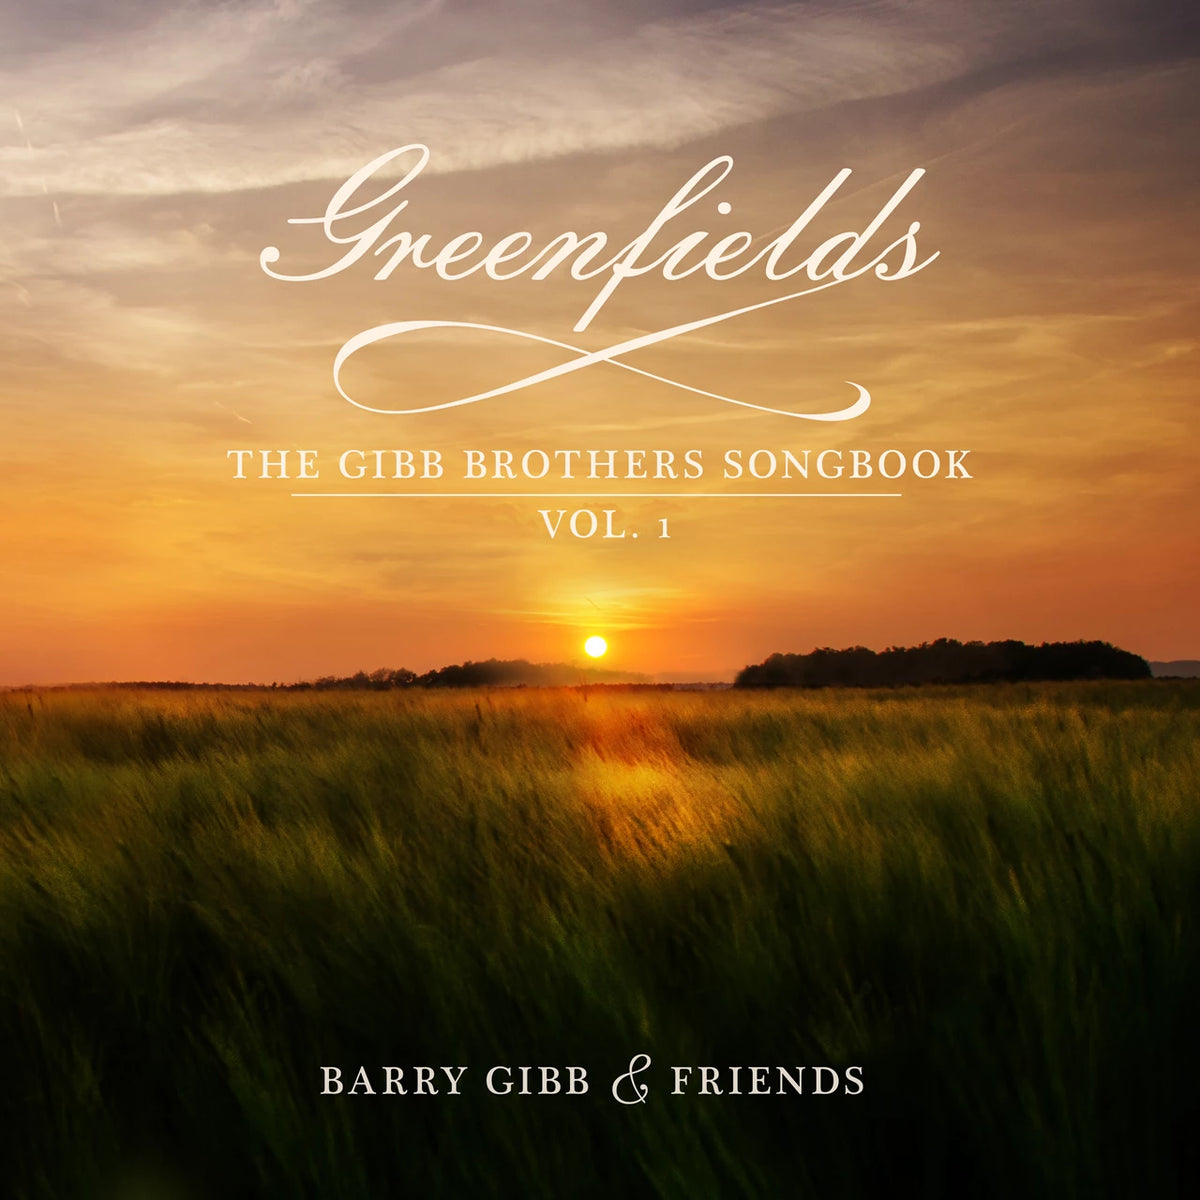 Barry Gibb &amp; Friends - Greenfields: The Gibb Brothers Songbook - Volume 1